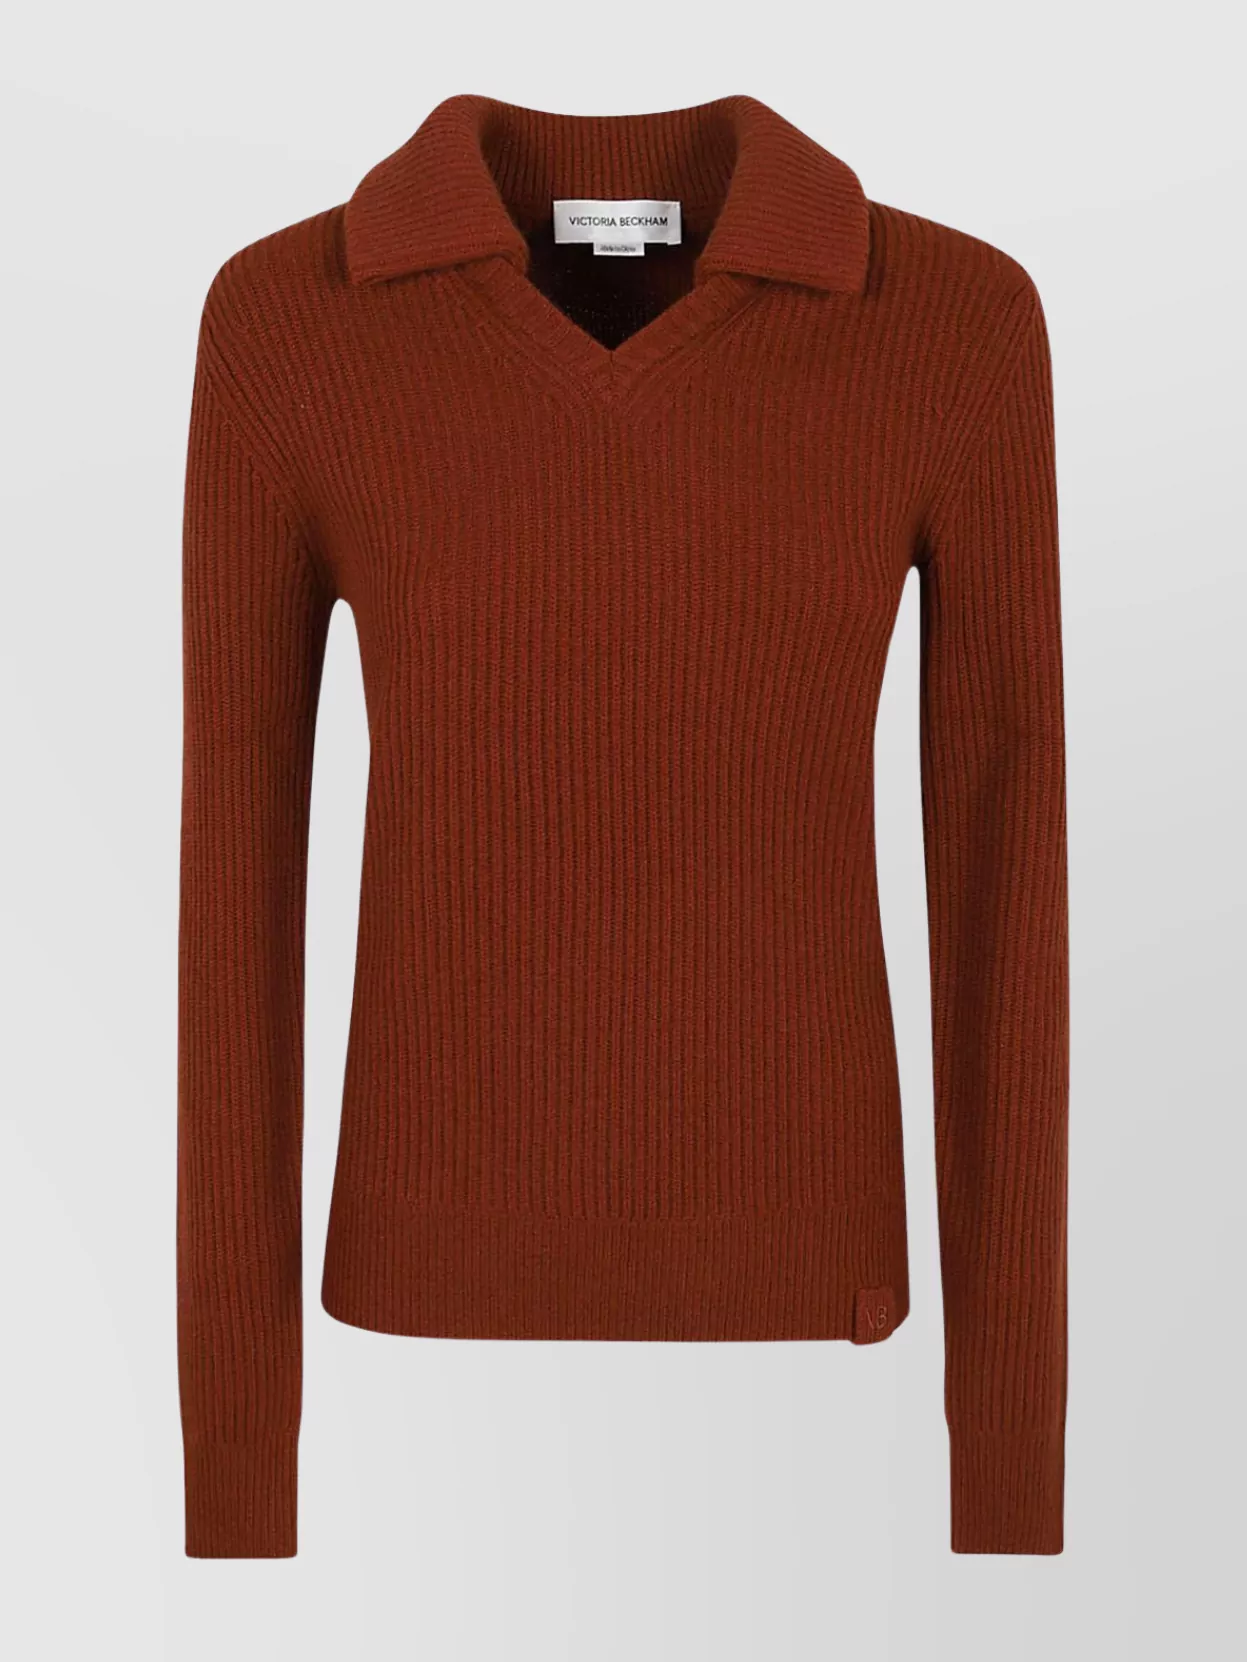 Victoria Beckham Fitted Ribbed V-neck Knitwear In Burgundy